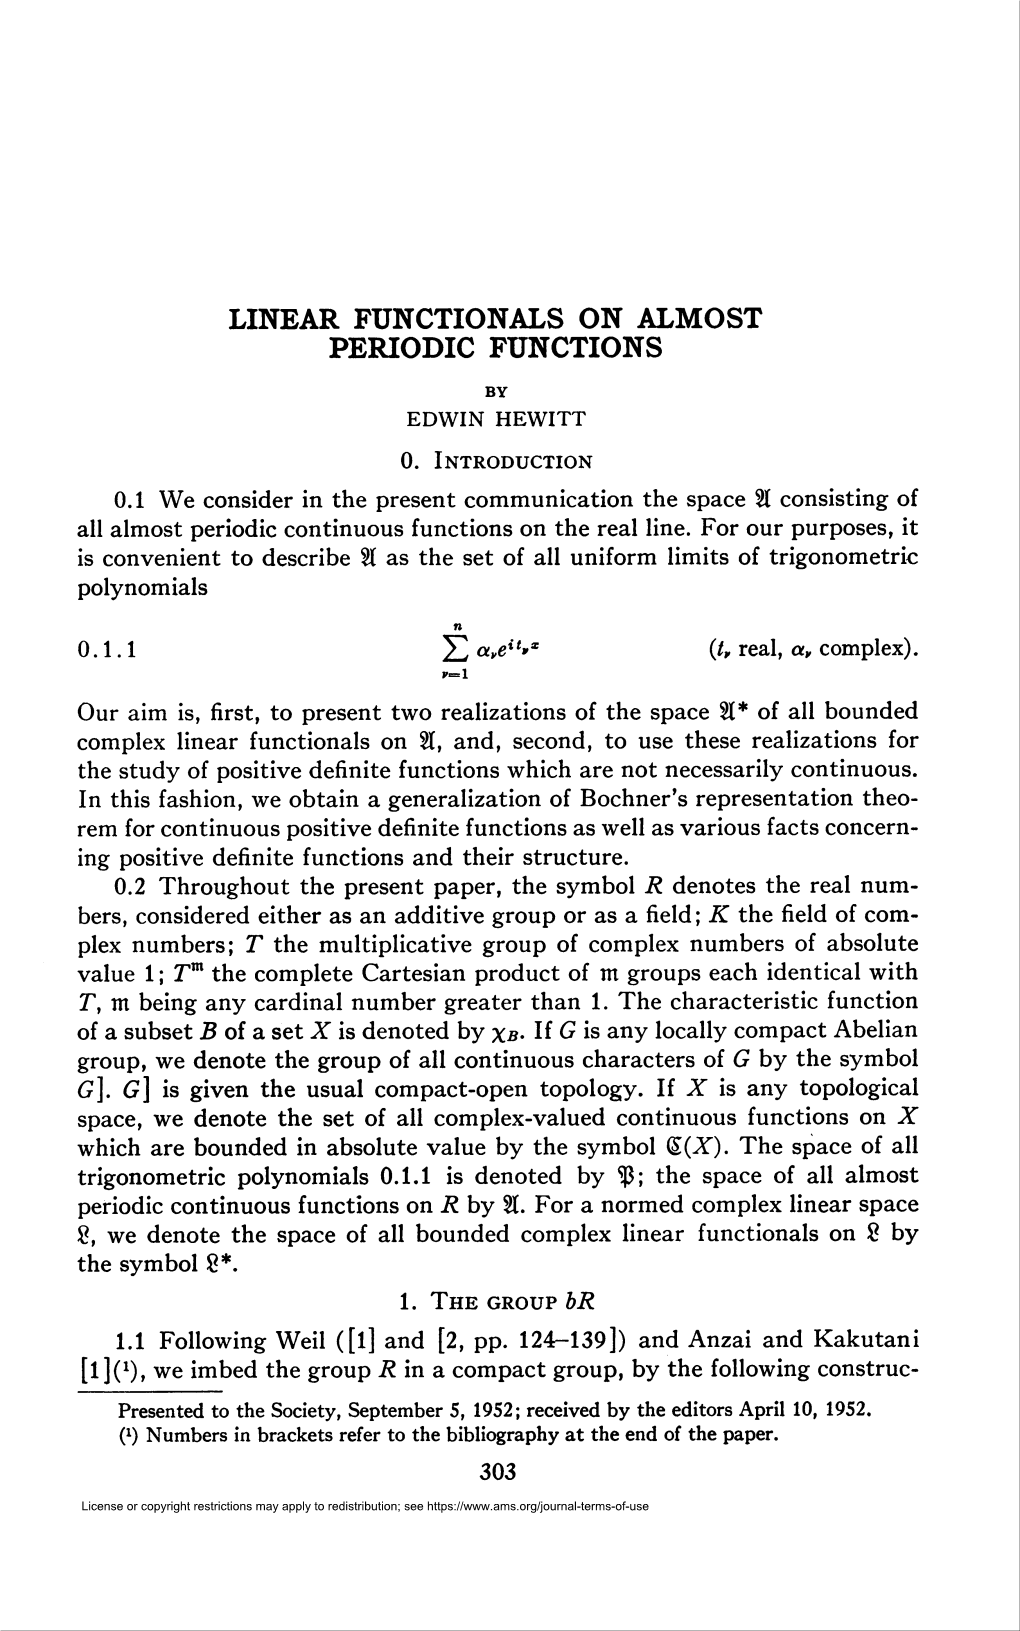 Linear Fـnctionals on Almost Periodic Functions